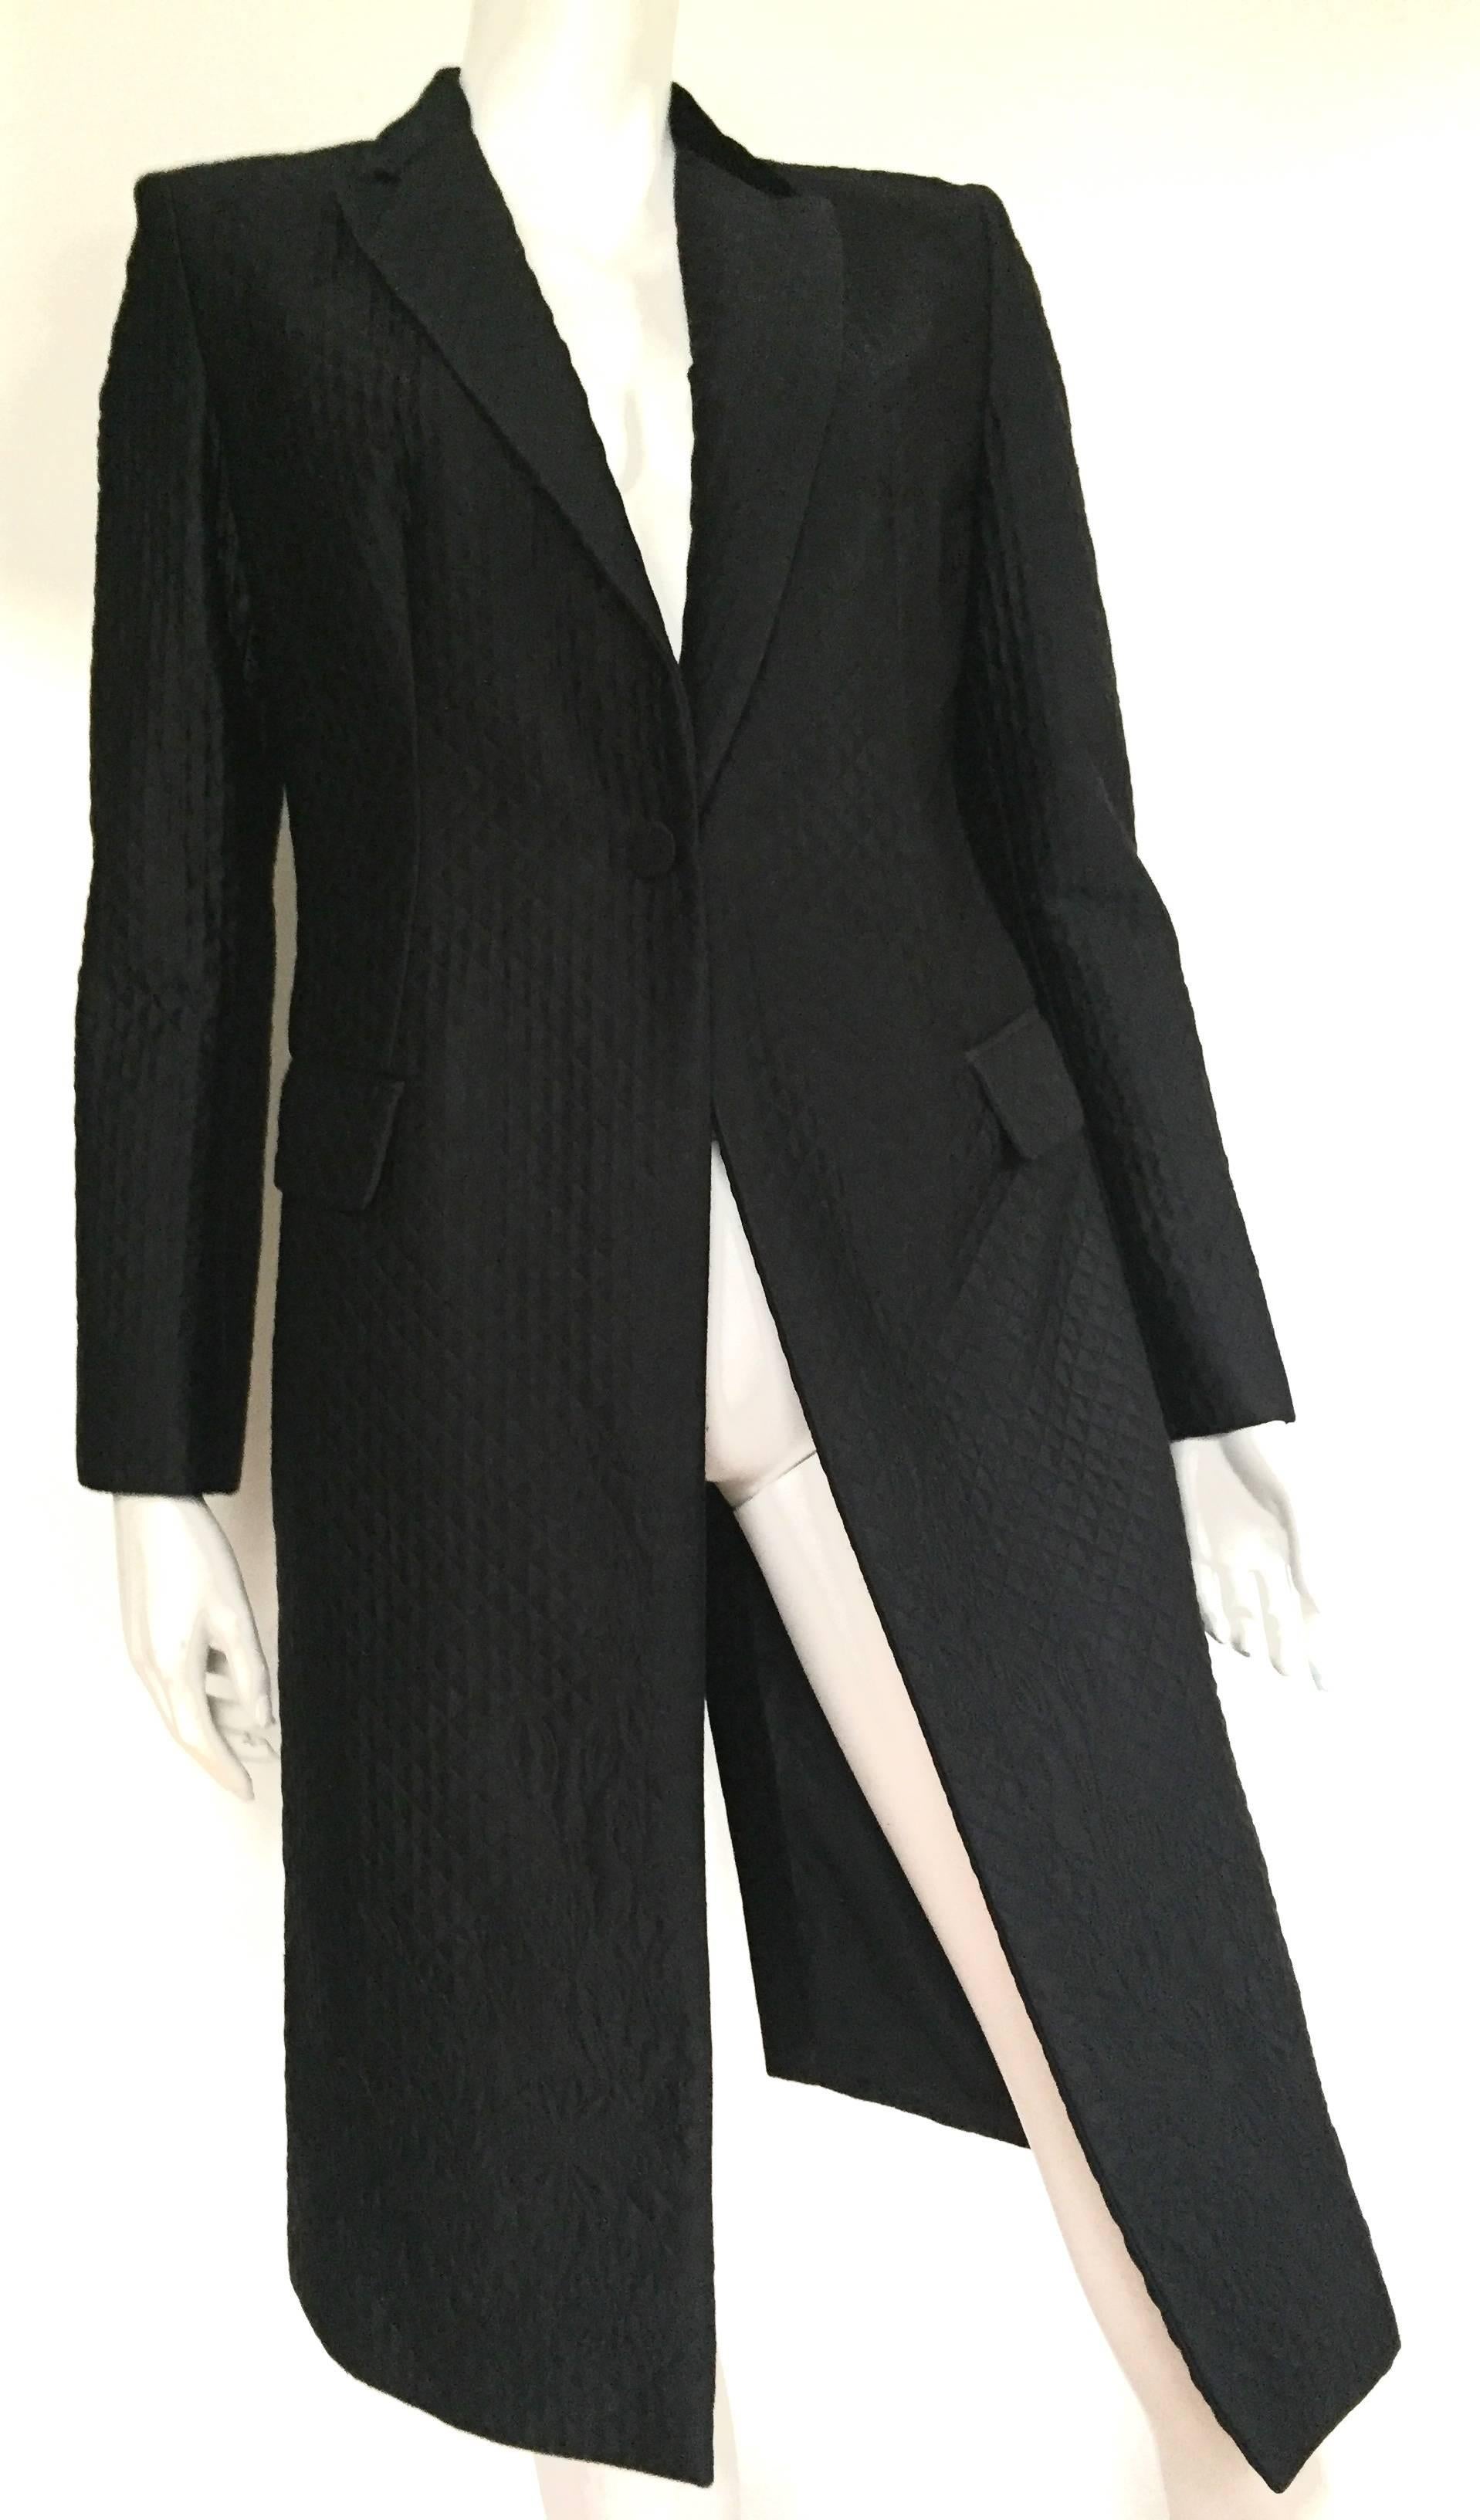 Alexander McQueen 2005 long black quilted silk coat is an Italian size 44 and fits a USA size 8 ( Please see & use the measurements below so that you can properly measure your waist to make sure this will fit you to perfection and the way Alexander